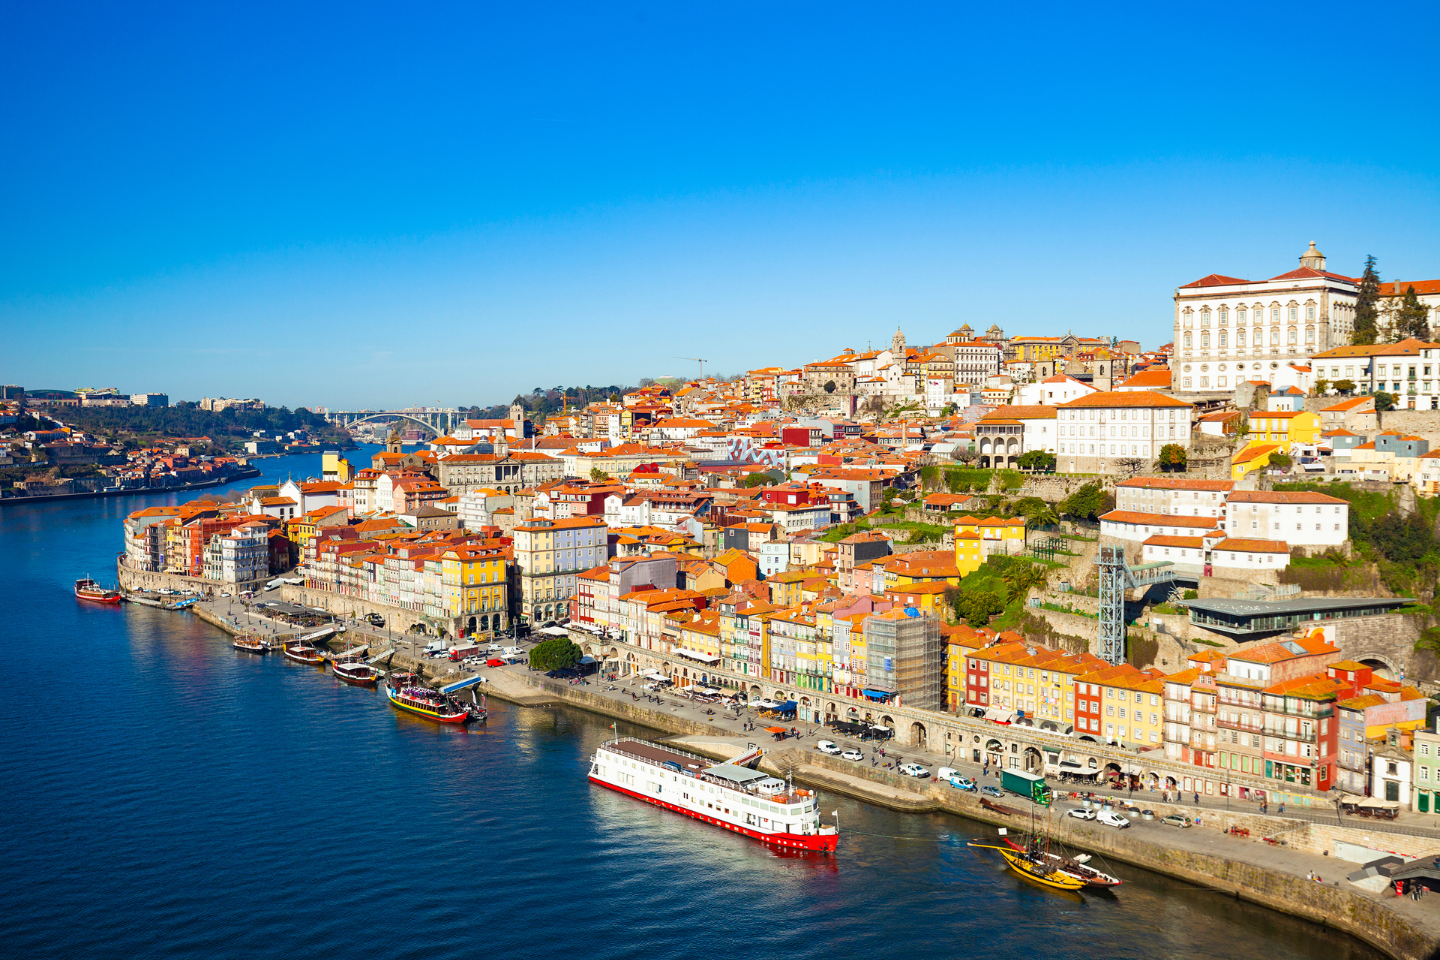 Scenic Portugal Discovering the Charm, Culture, and Wonders of Western Europe